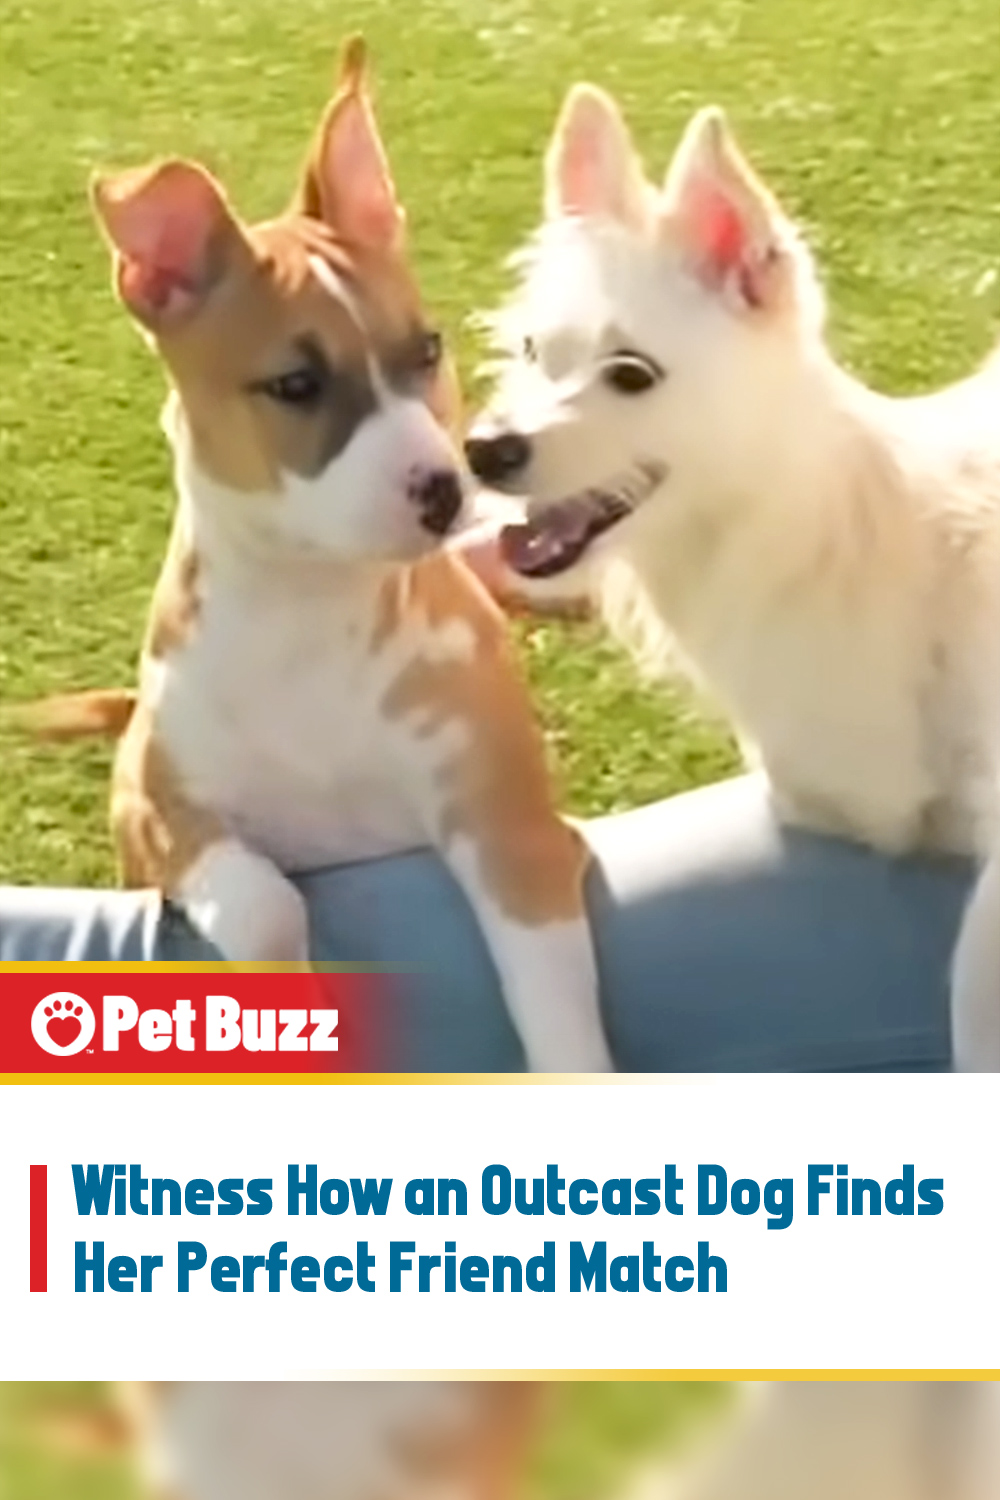 Witness How an Outcast Dog Finds Her Perfect Friend Match